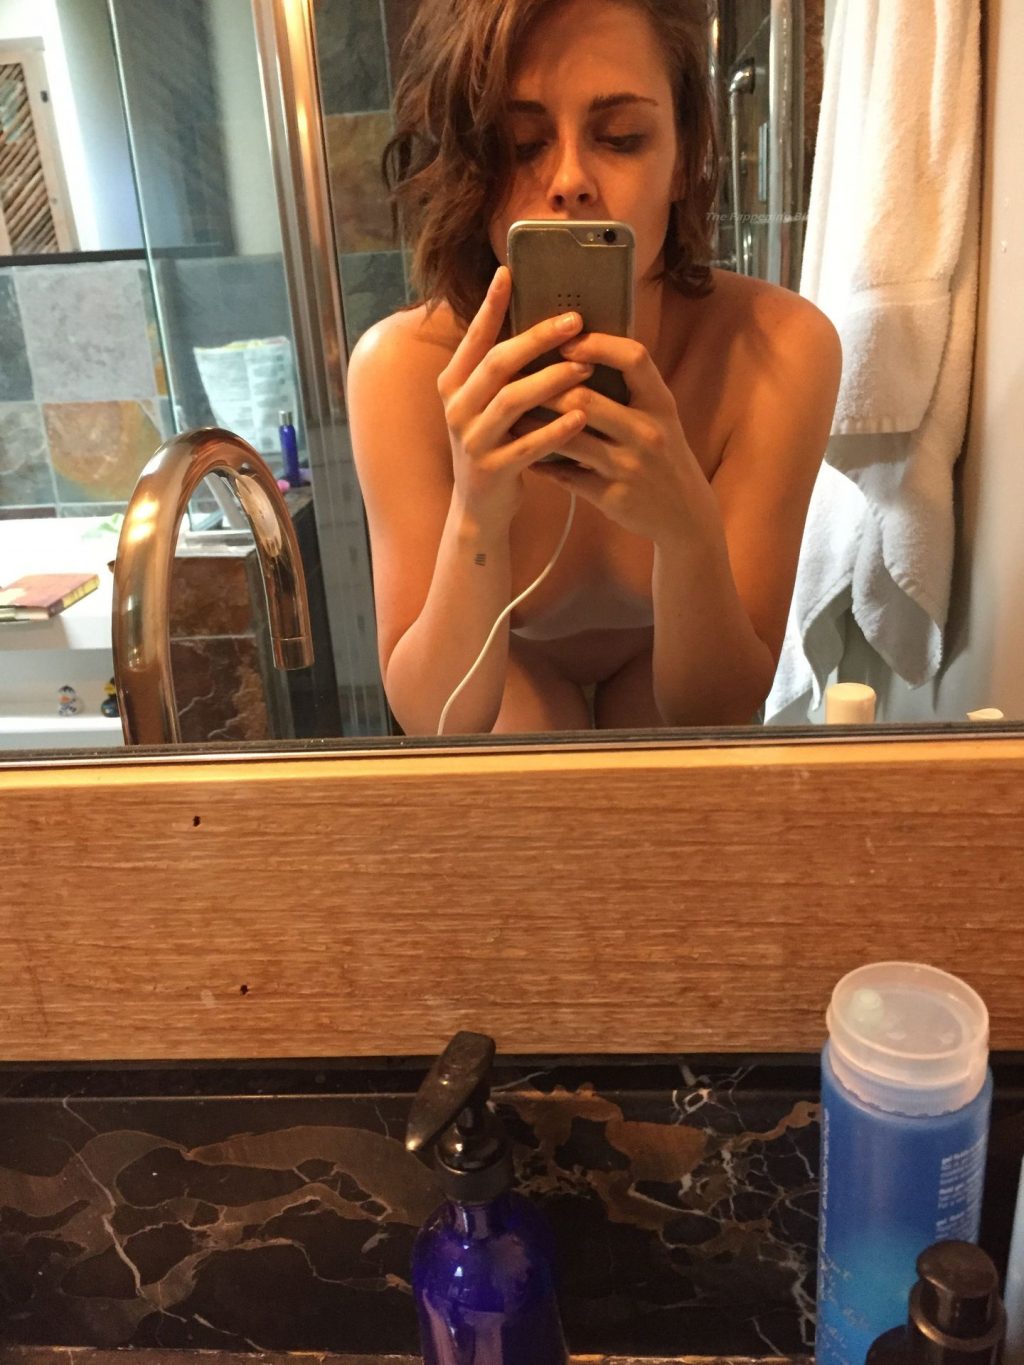 Fappening 2 nudes